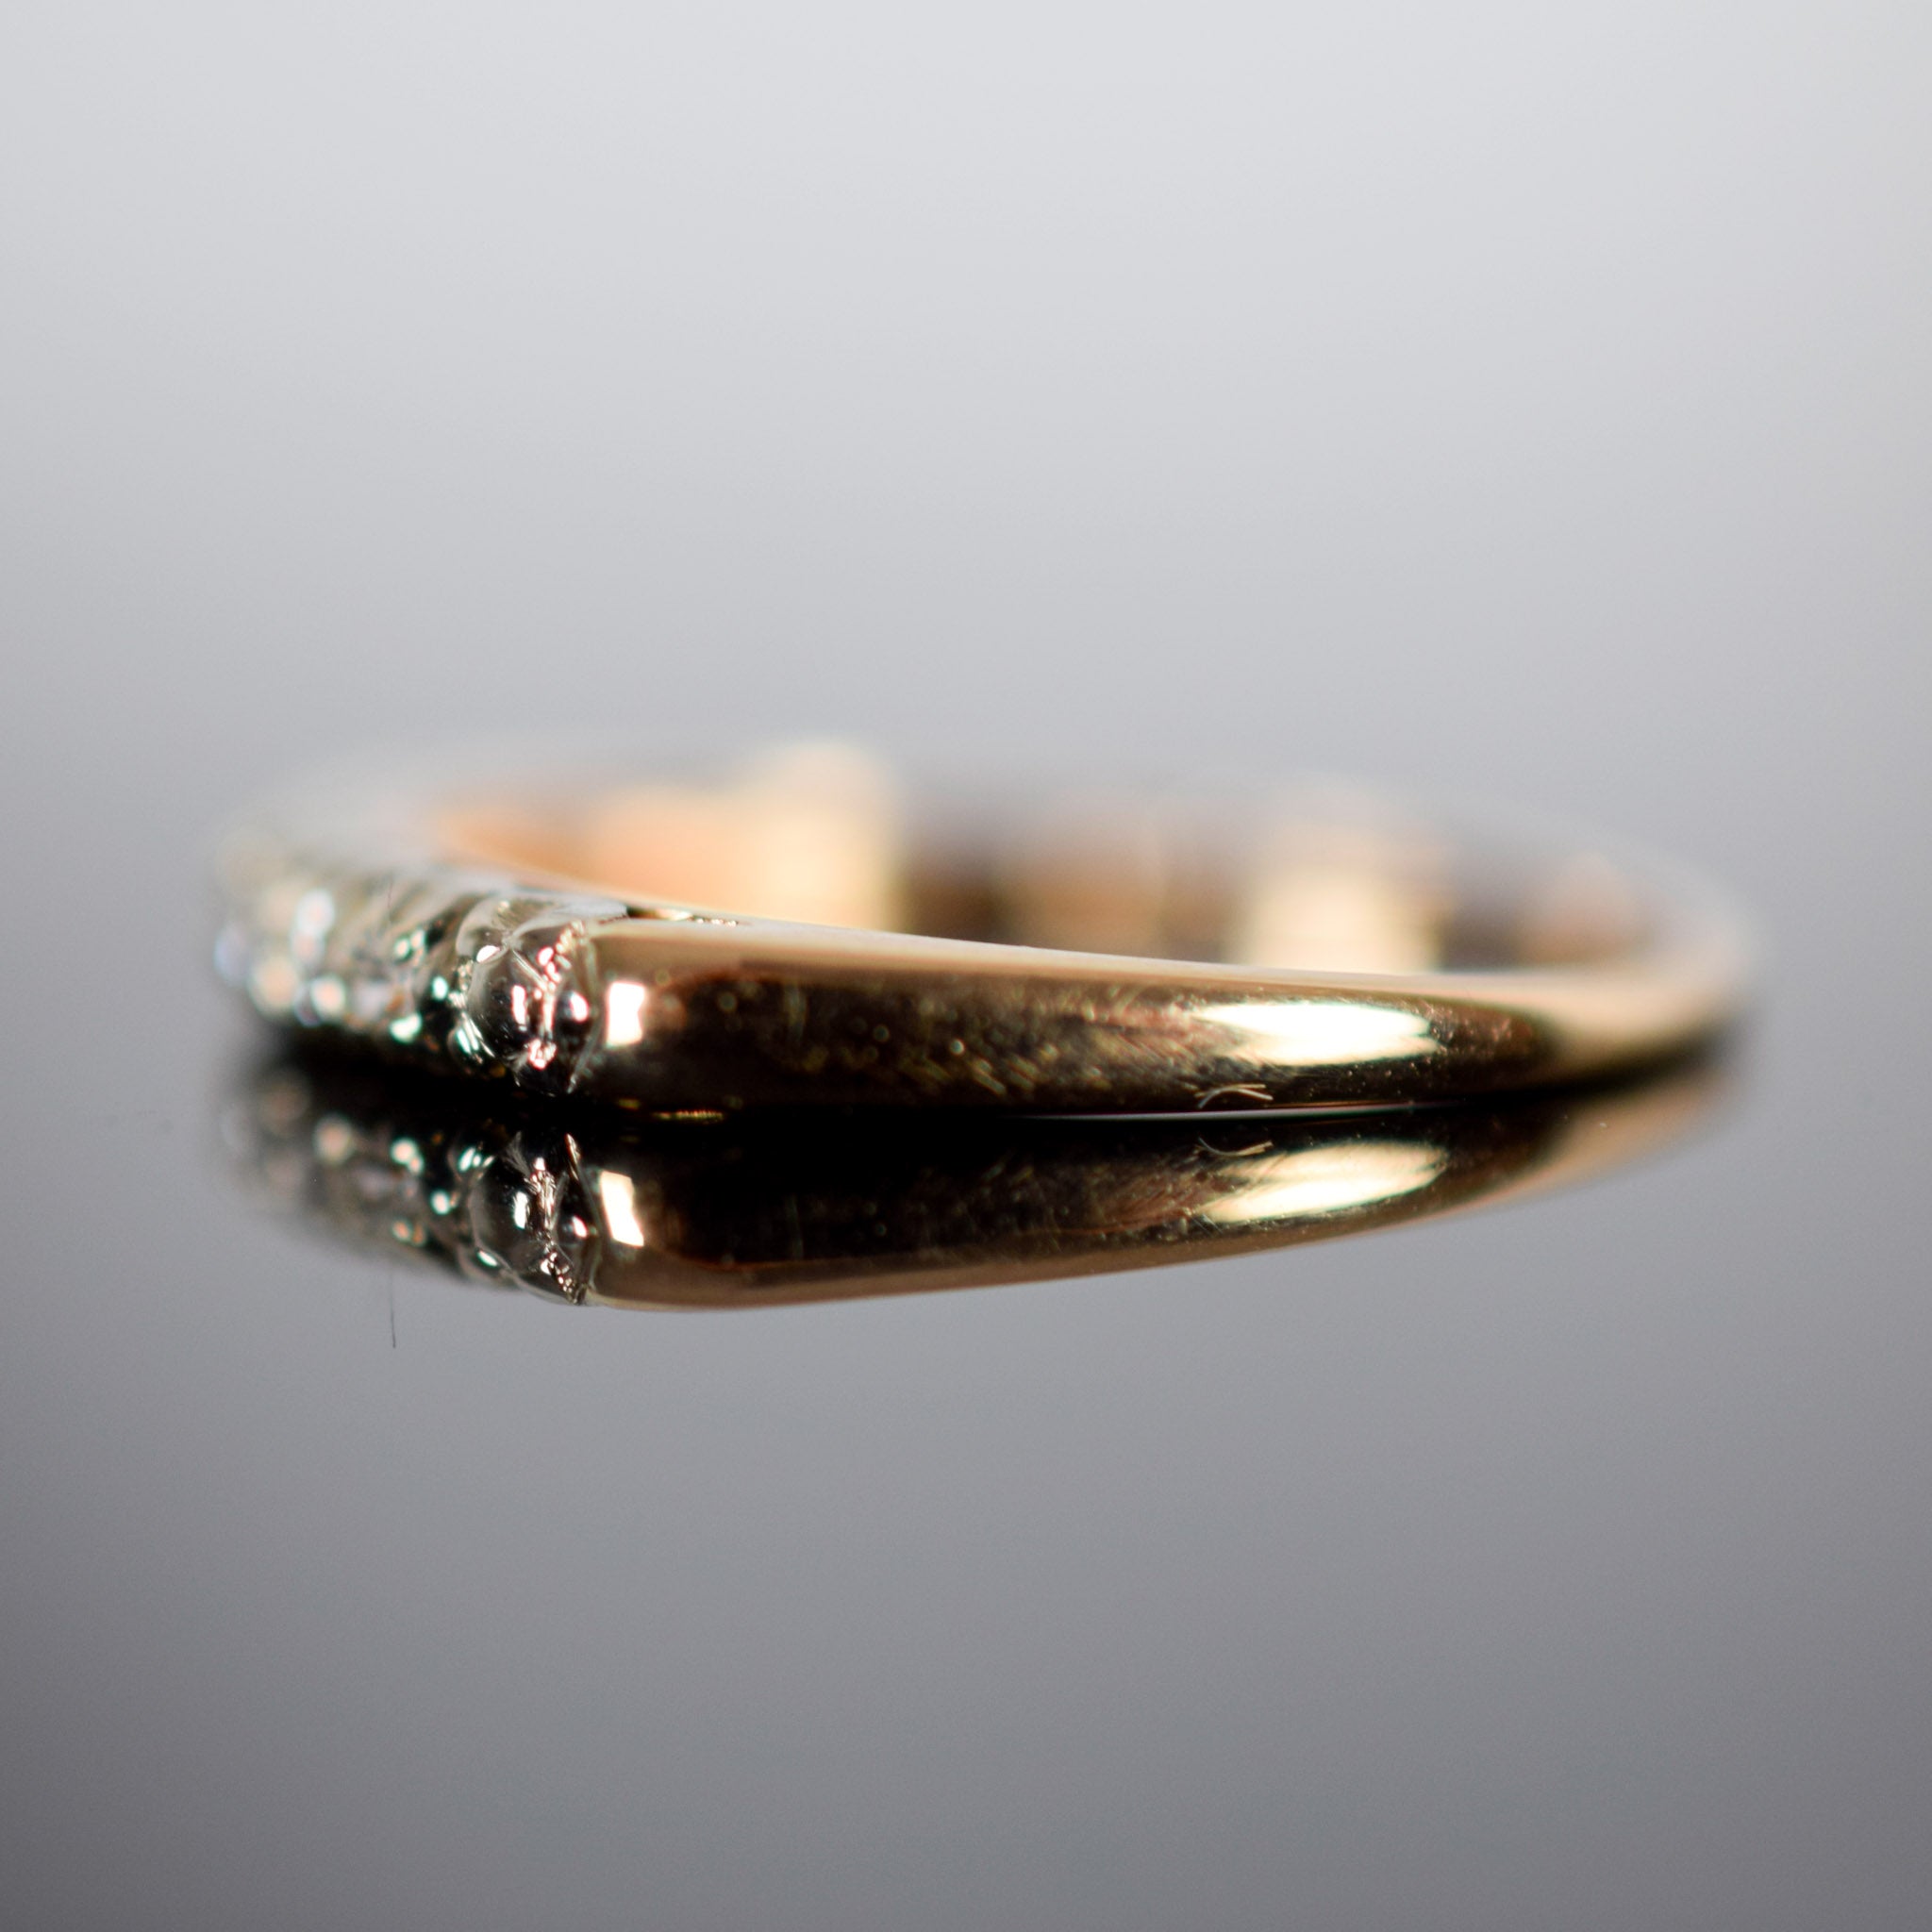 diamond stacking ring for sale, folklor